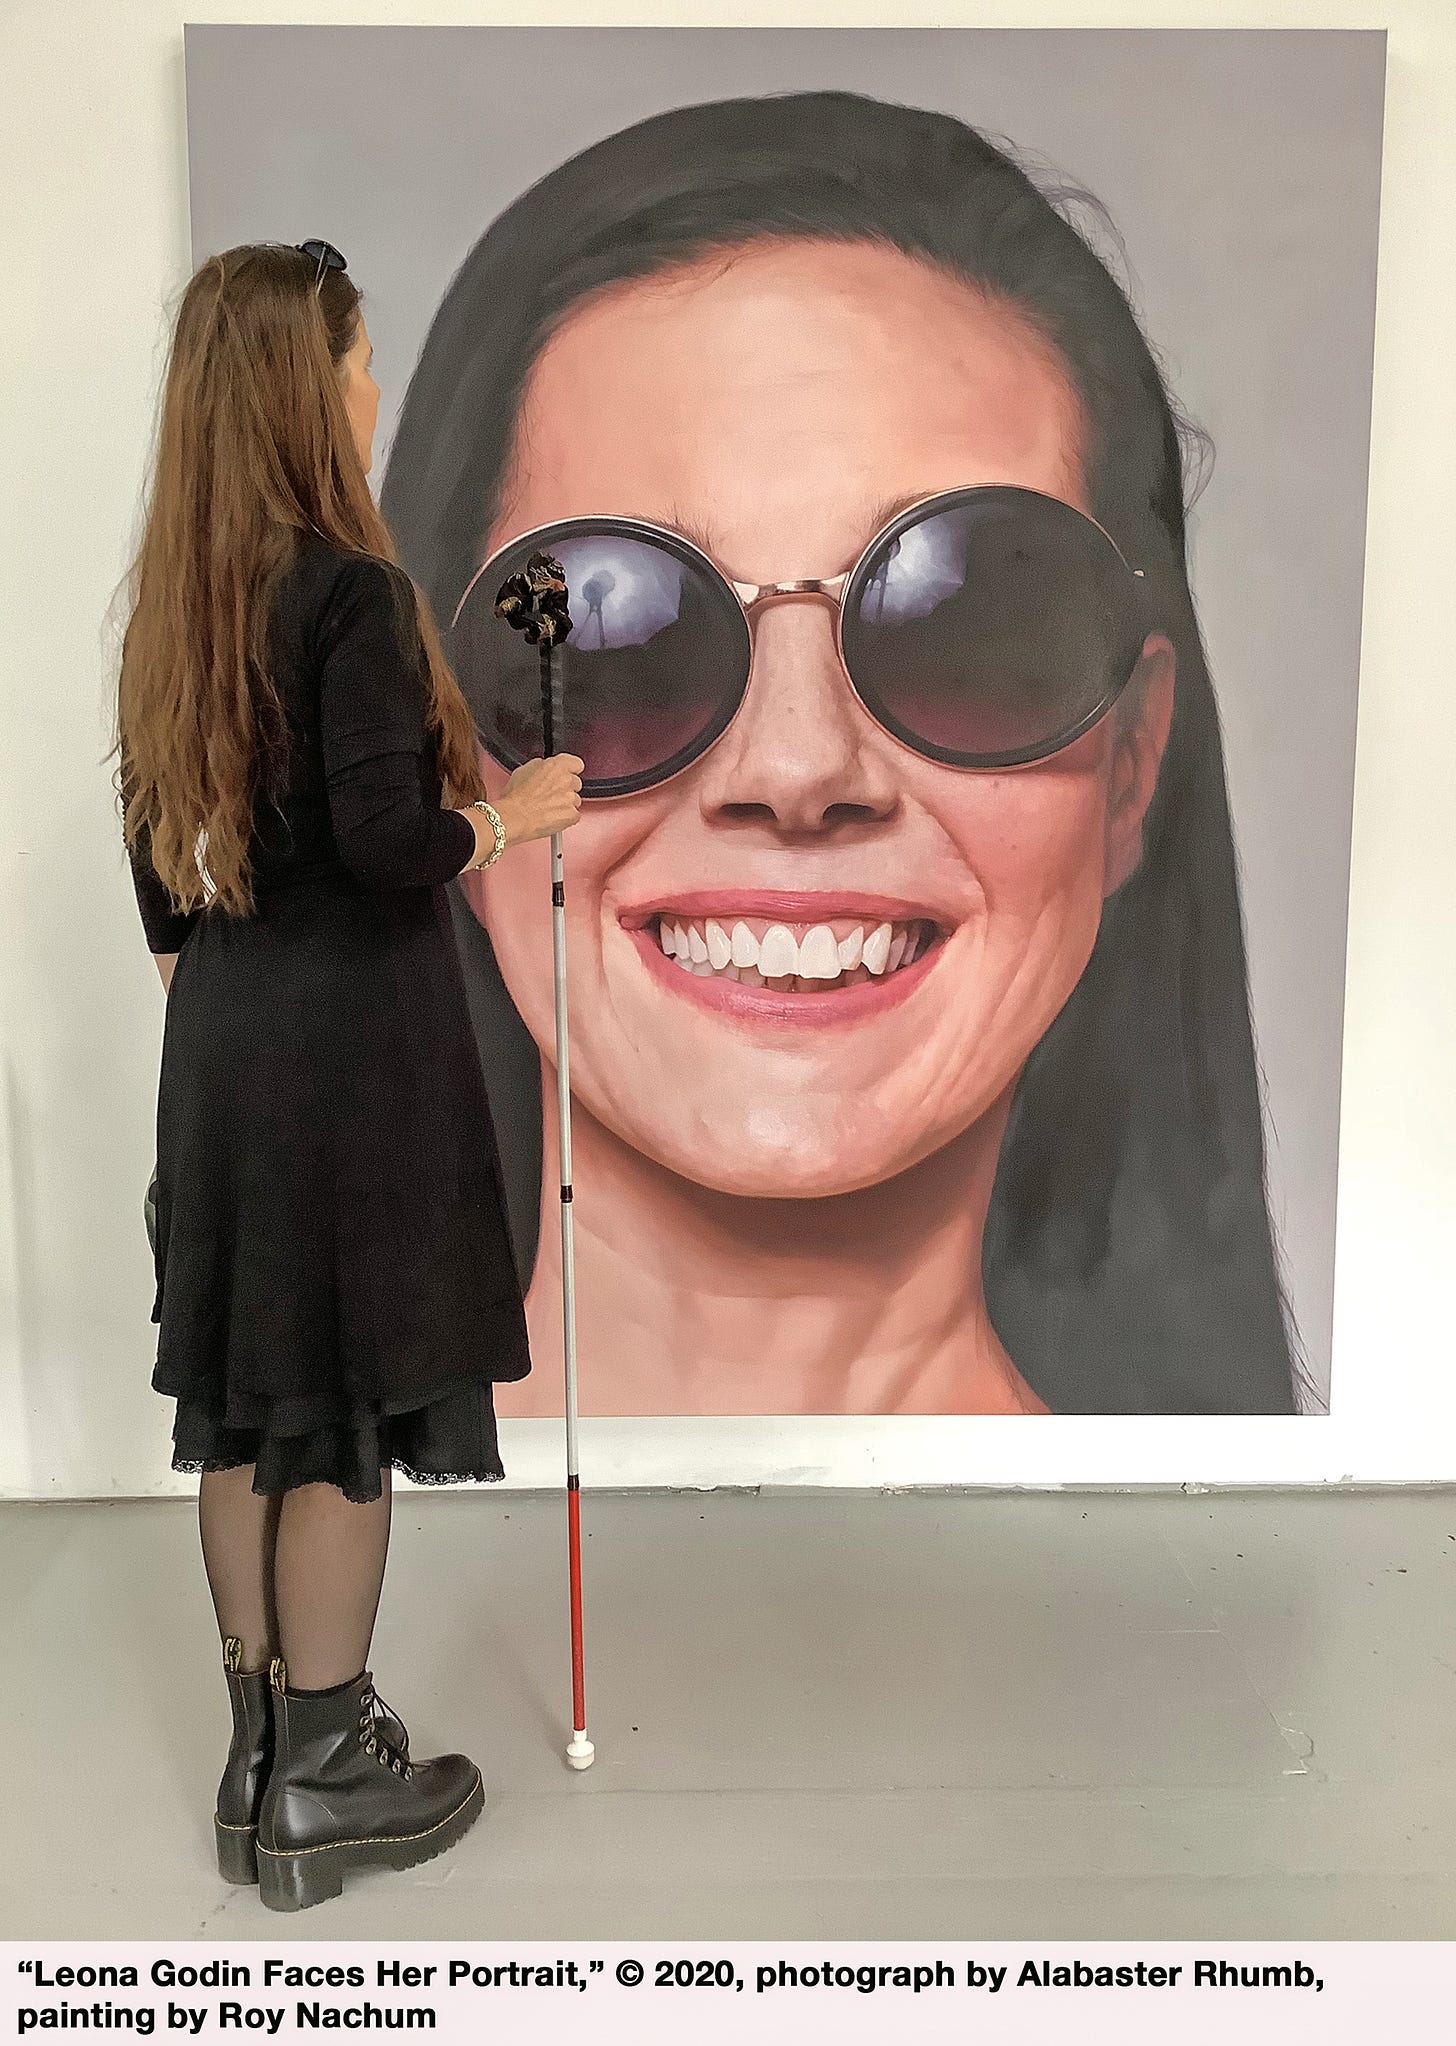 By M. Leona Godin: I’m standing to the side of and facing a six-foot canvas on which is painted a hyper-realistic close-up of my head. In the painting I’m wearing purple and gold sunglasses (which sit slightly askew, and which reflect the lighting umbrellas) and smiling. In the studio I’m standing in a black wrap dress, wearing black Dr Martens, and holding Moses, who bisects the painting from the sunglasses downward. My black sunglasses are perched on my head. Author image credits - The painting is by Roy Nachum, and the photograph was taken in Roy’s studio by Alabaster Rhumb.